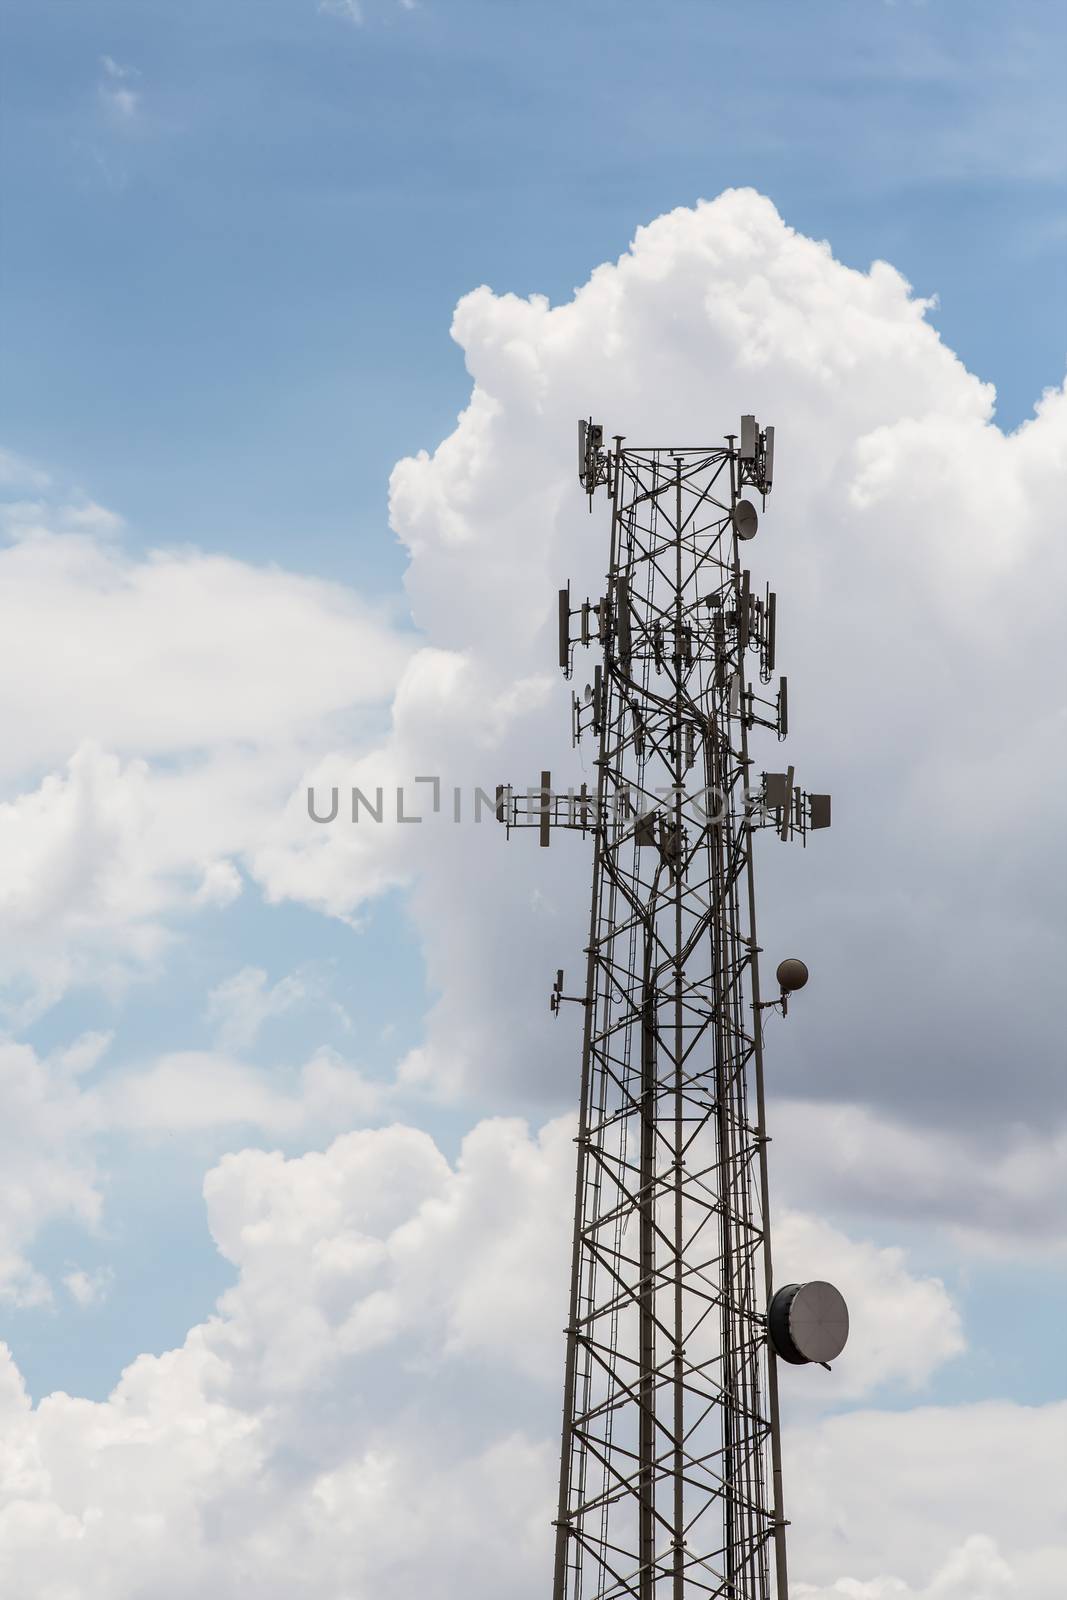 Single tall telecommunications tower with clouds in background